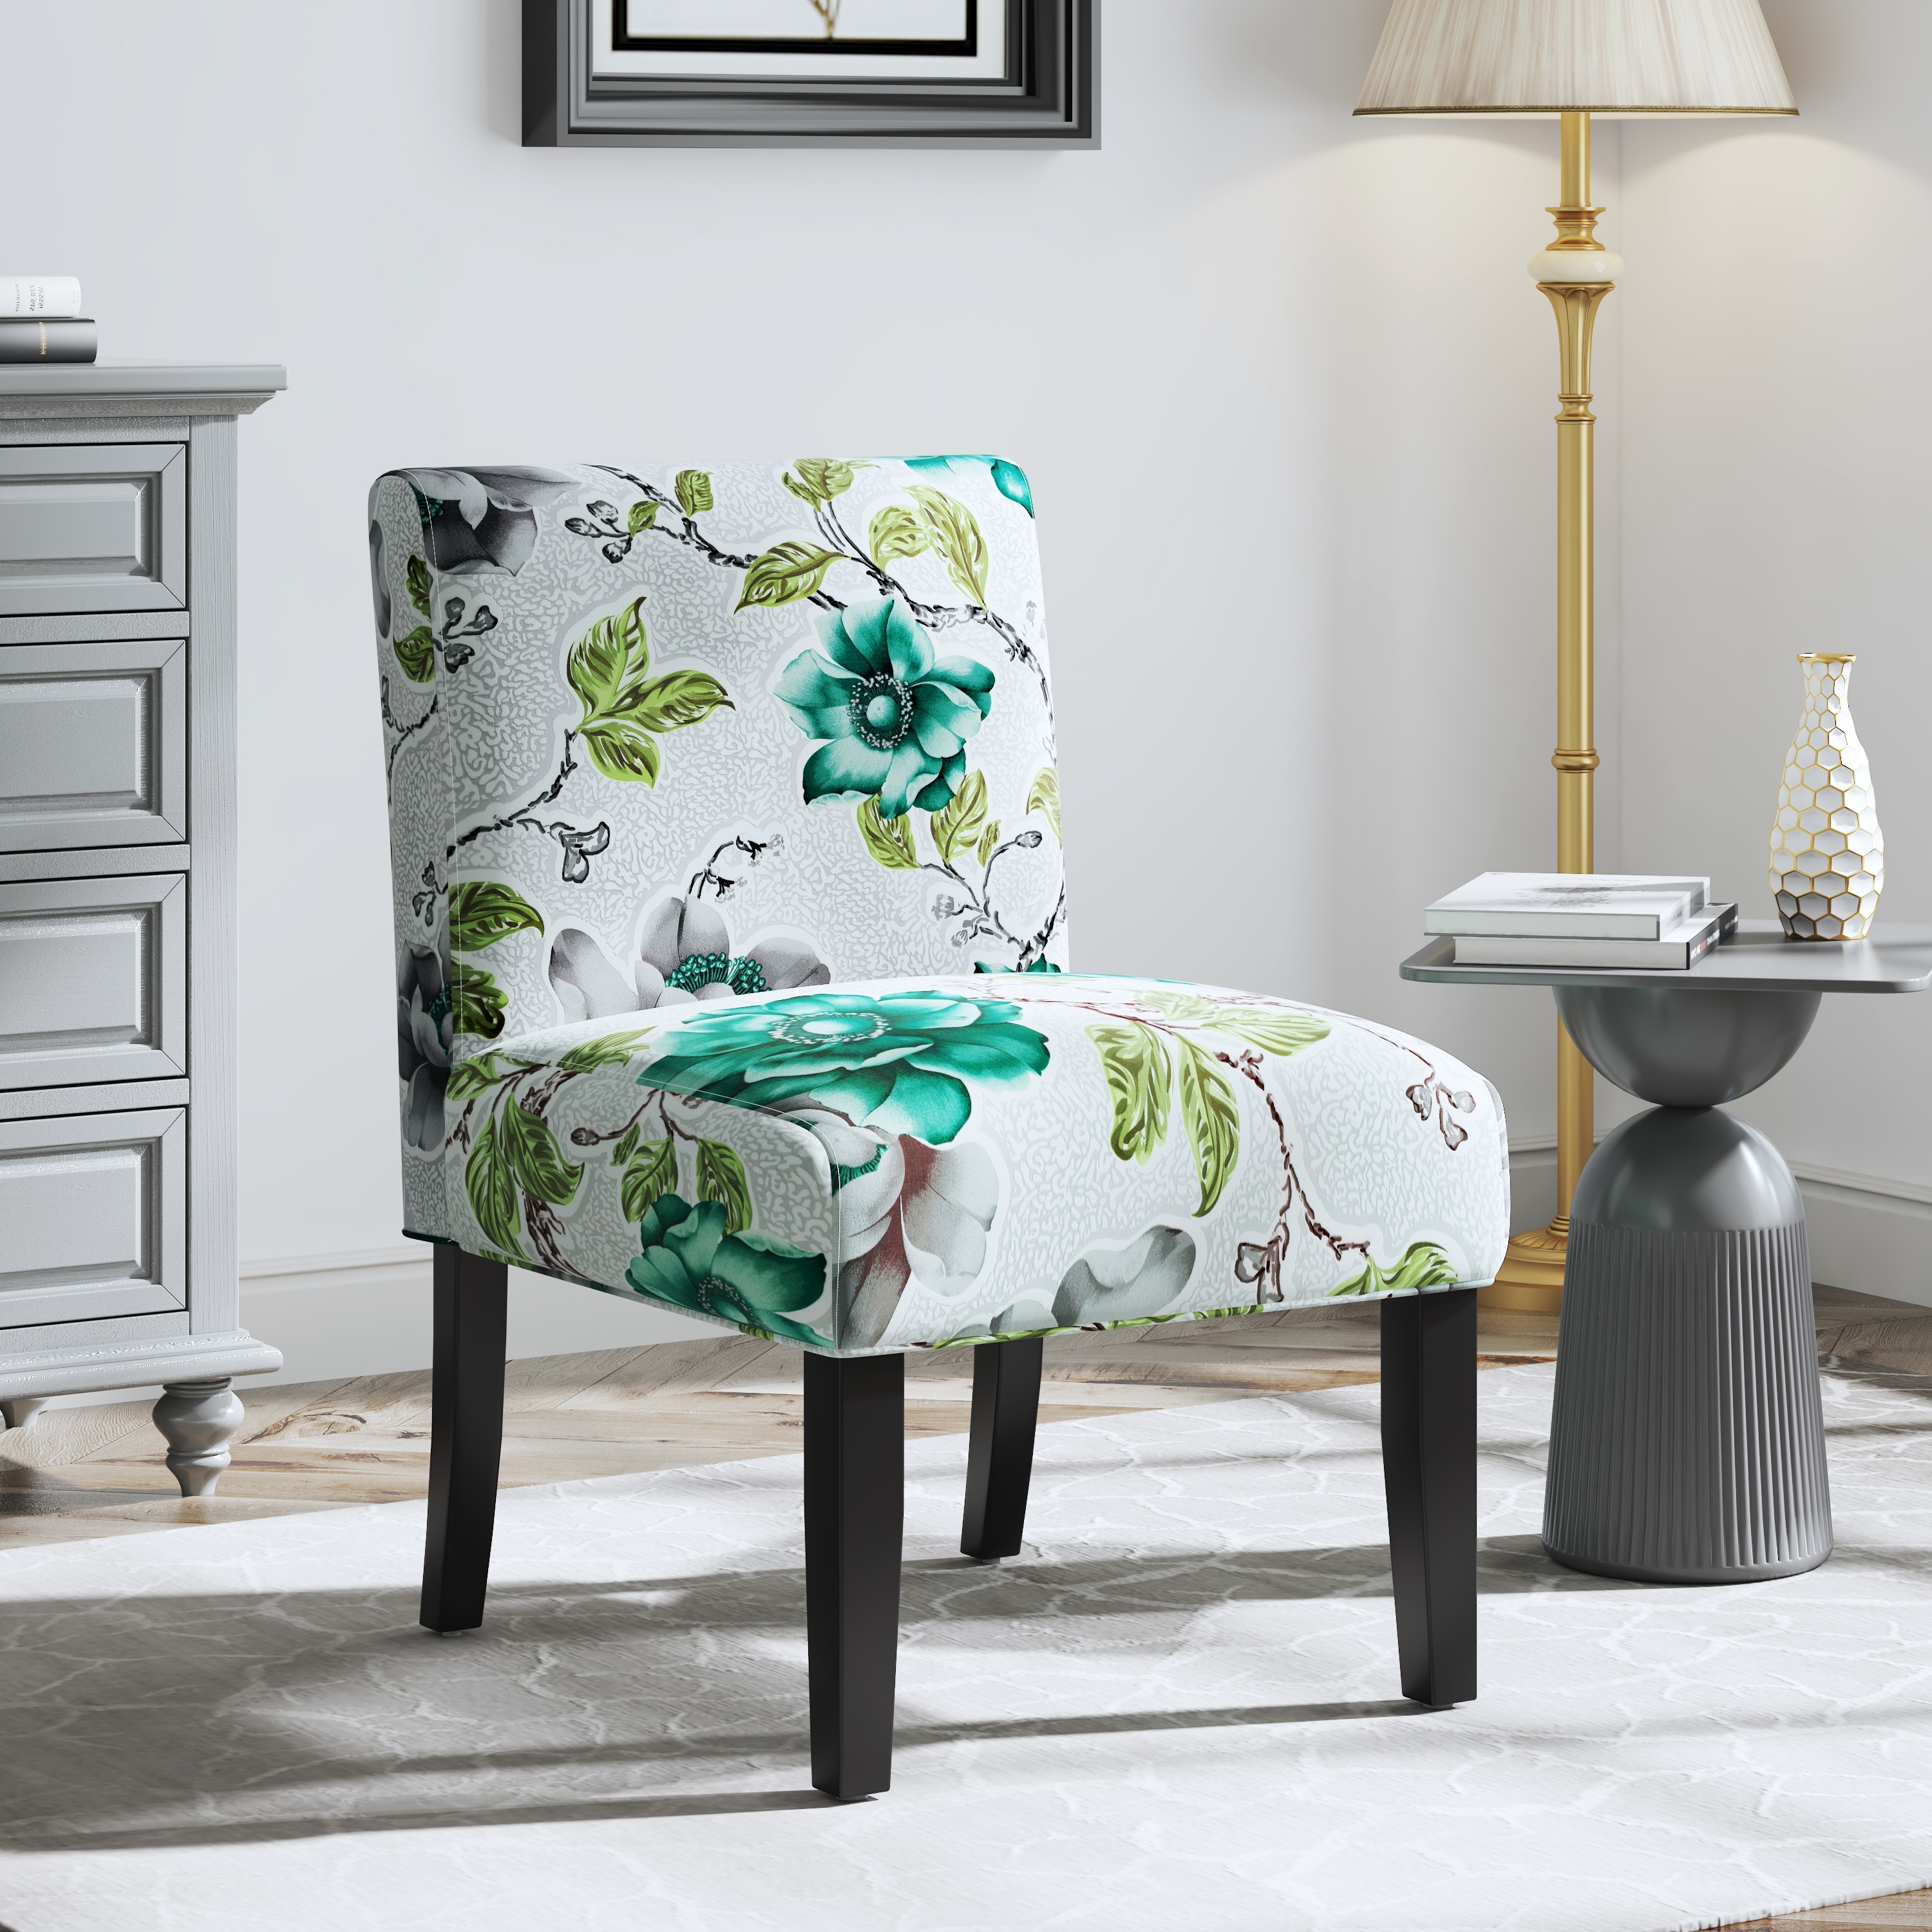 Living Room Chairs Shop Online At Overstock